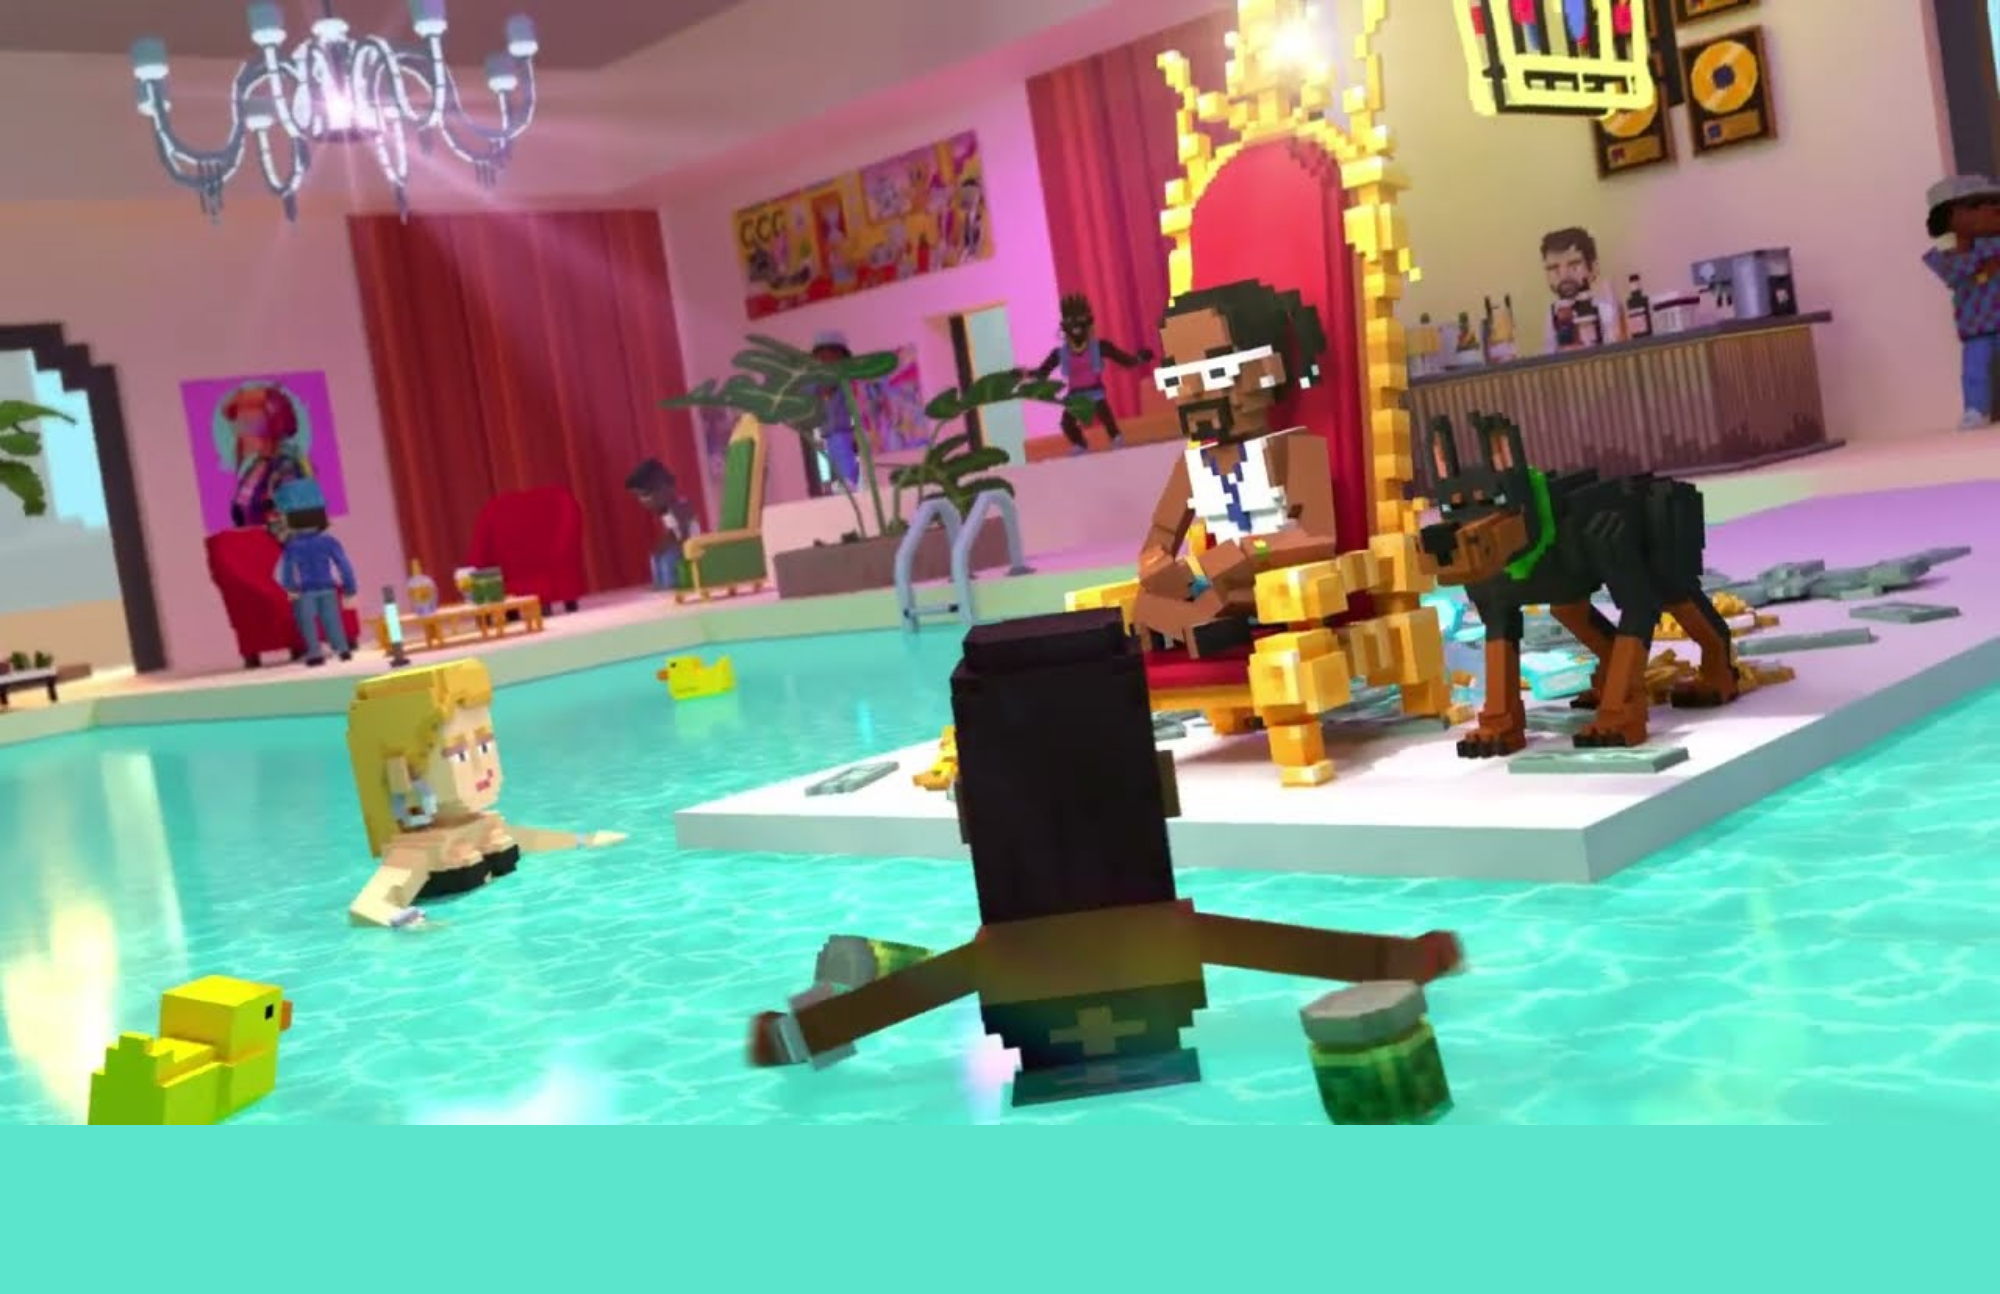 In Sandbox, Snoop Dogg's avatar sits on a royalty chair in the center of the pool with other players